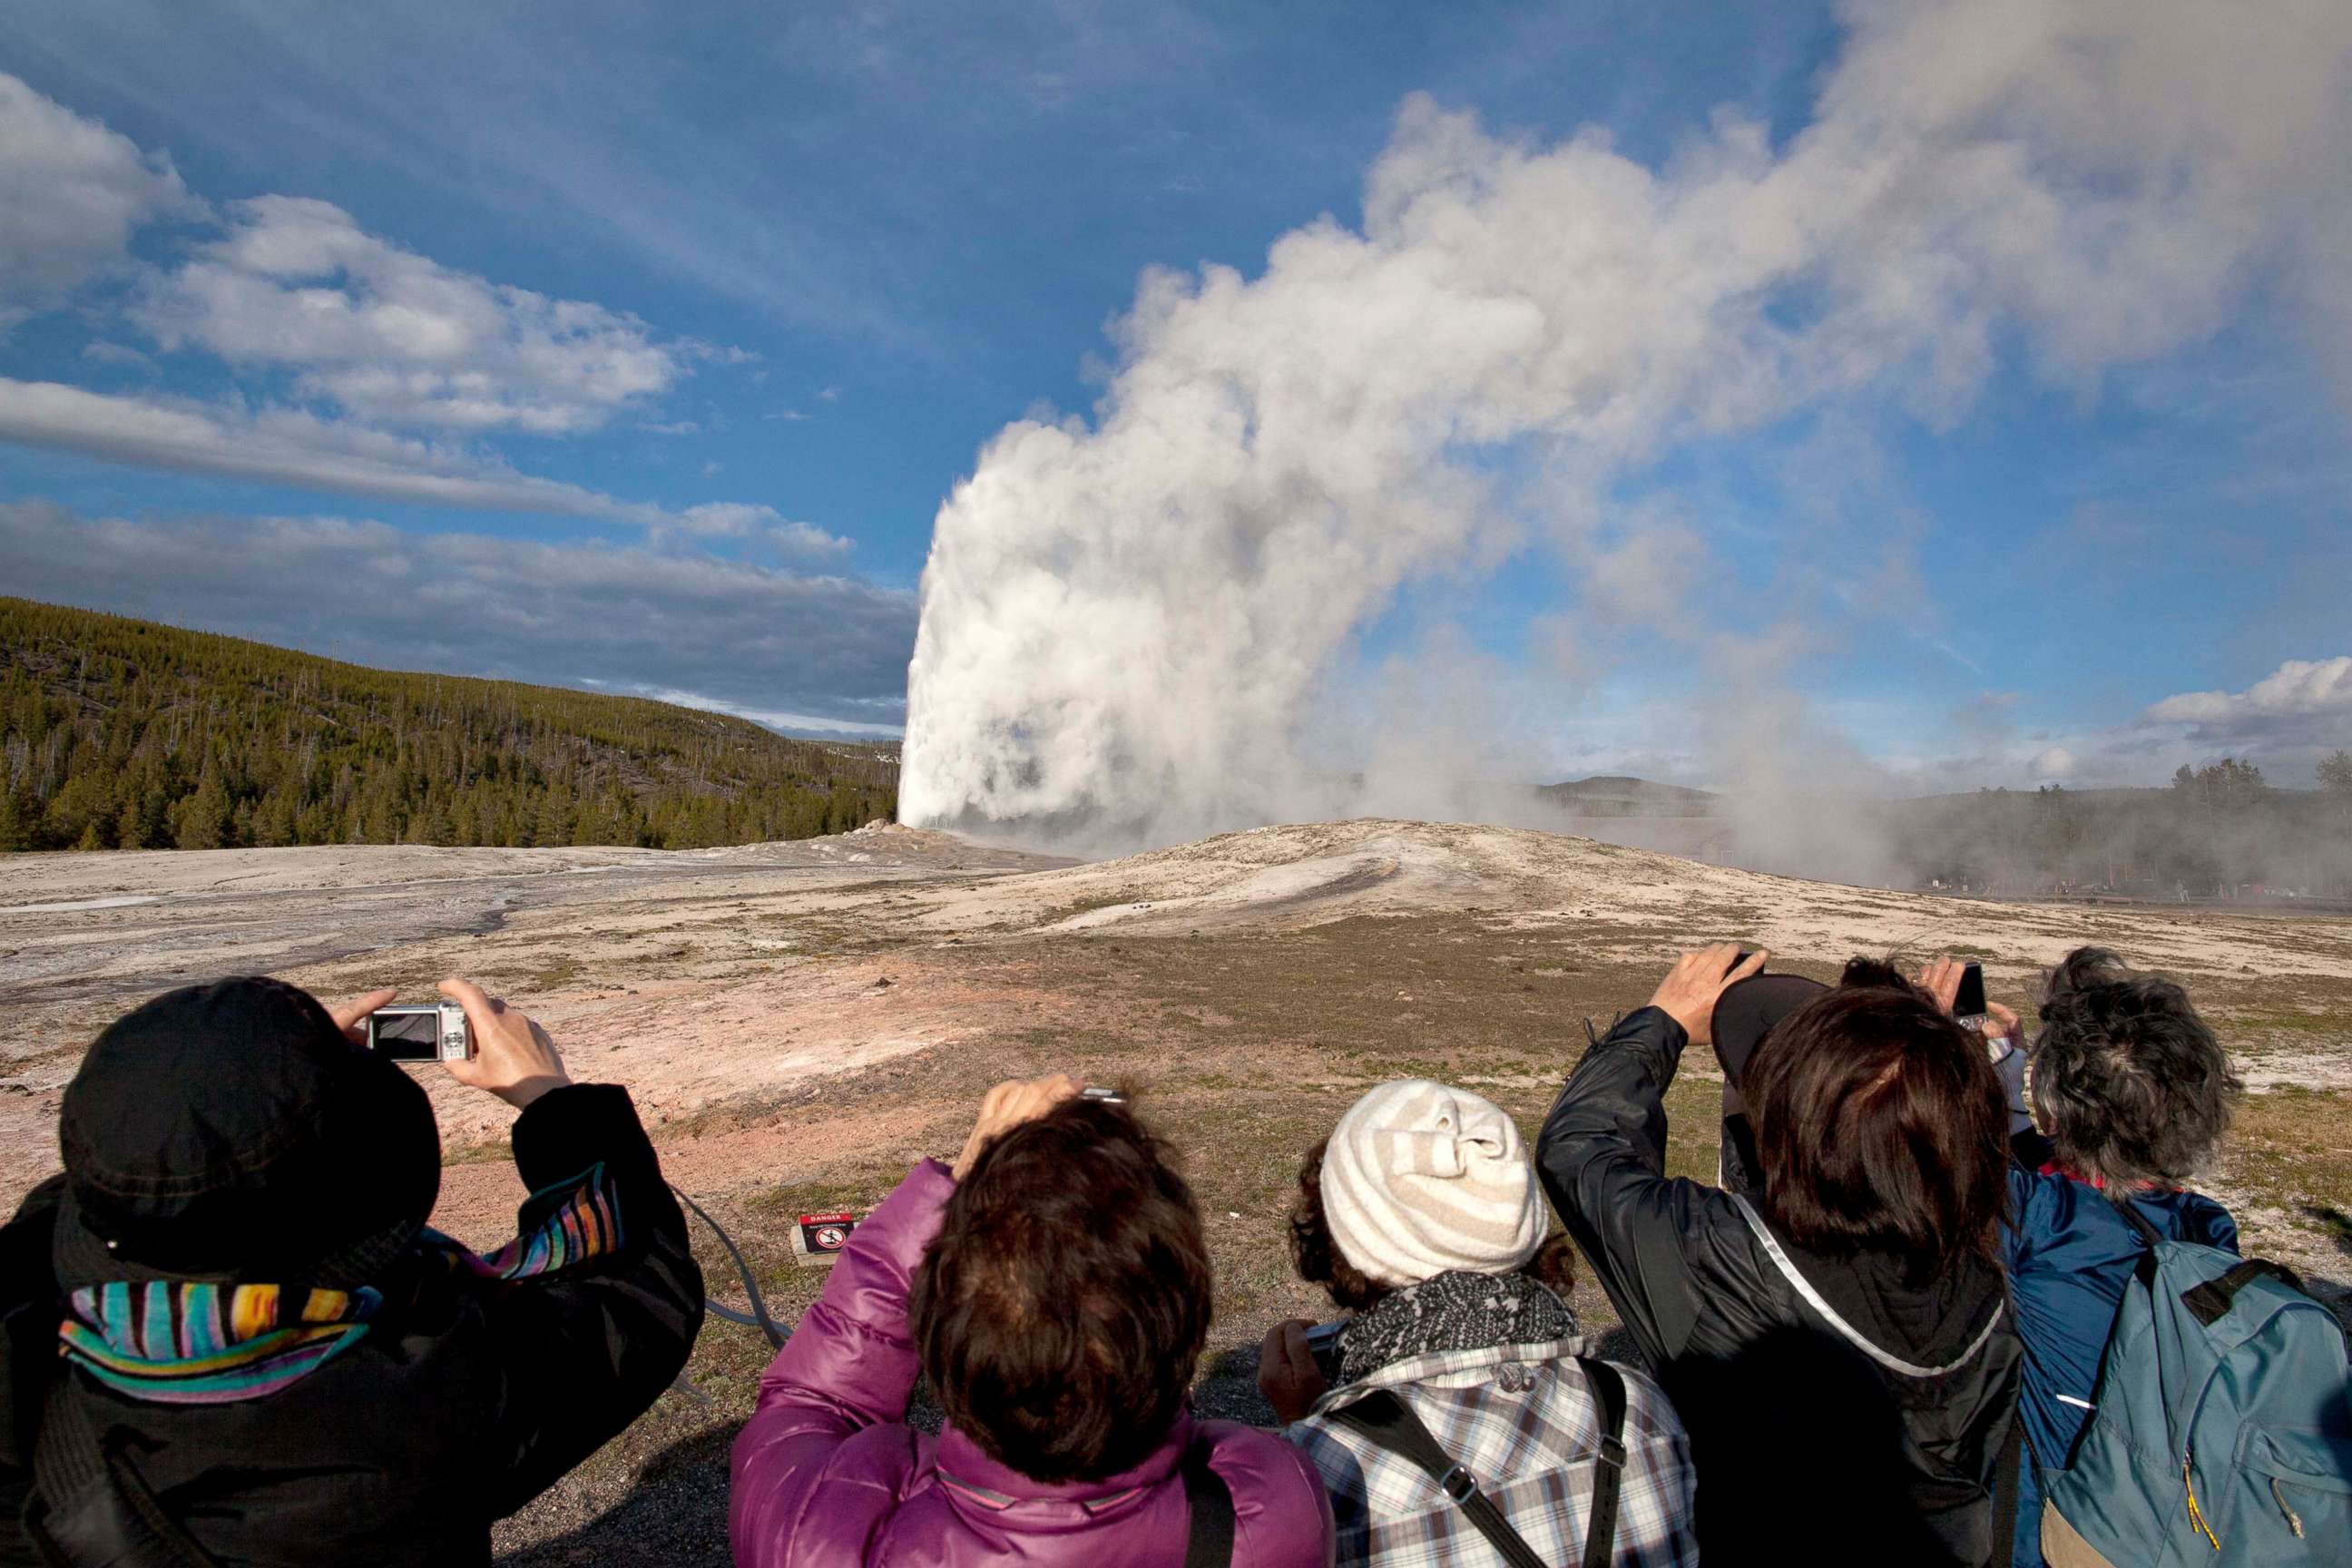 PHOTO: In this file photo taken on May 21, 2011, tourists photograph Old Faithful erupting on schedule late in the afternoon in Yellowstone National Park, Wyoming.